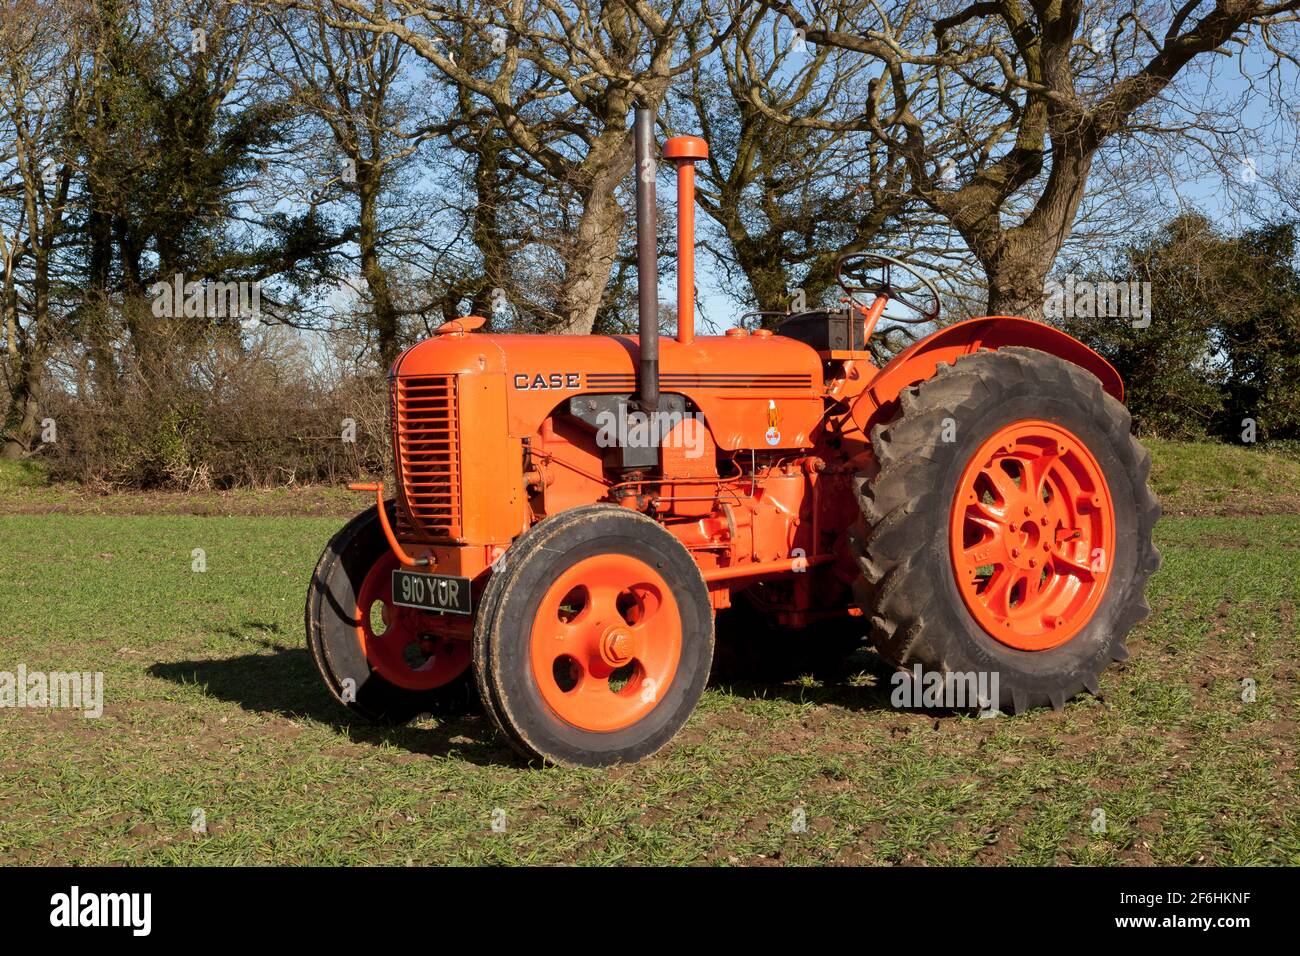 A vintage Case tractor in a field drilled with corn in Spring time Stock Photo